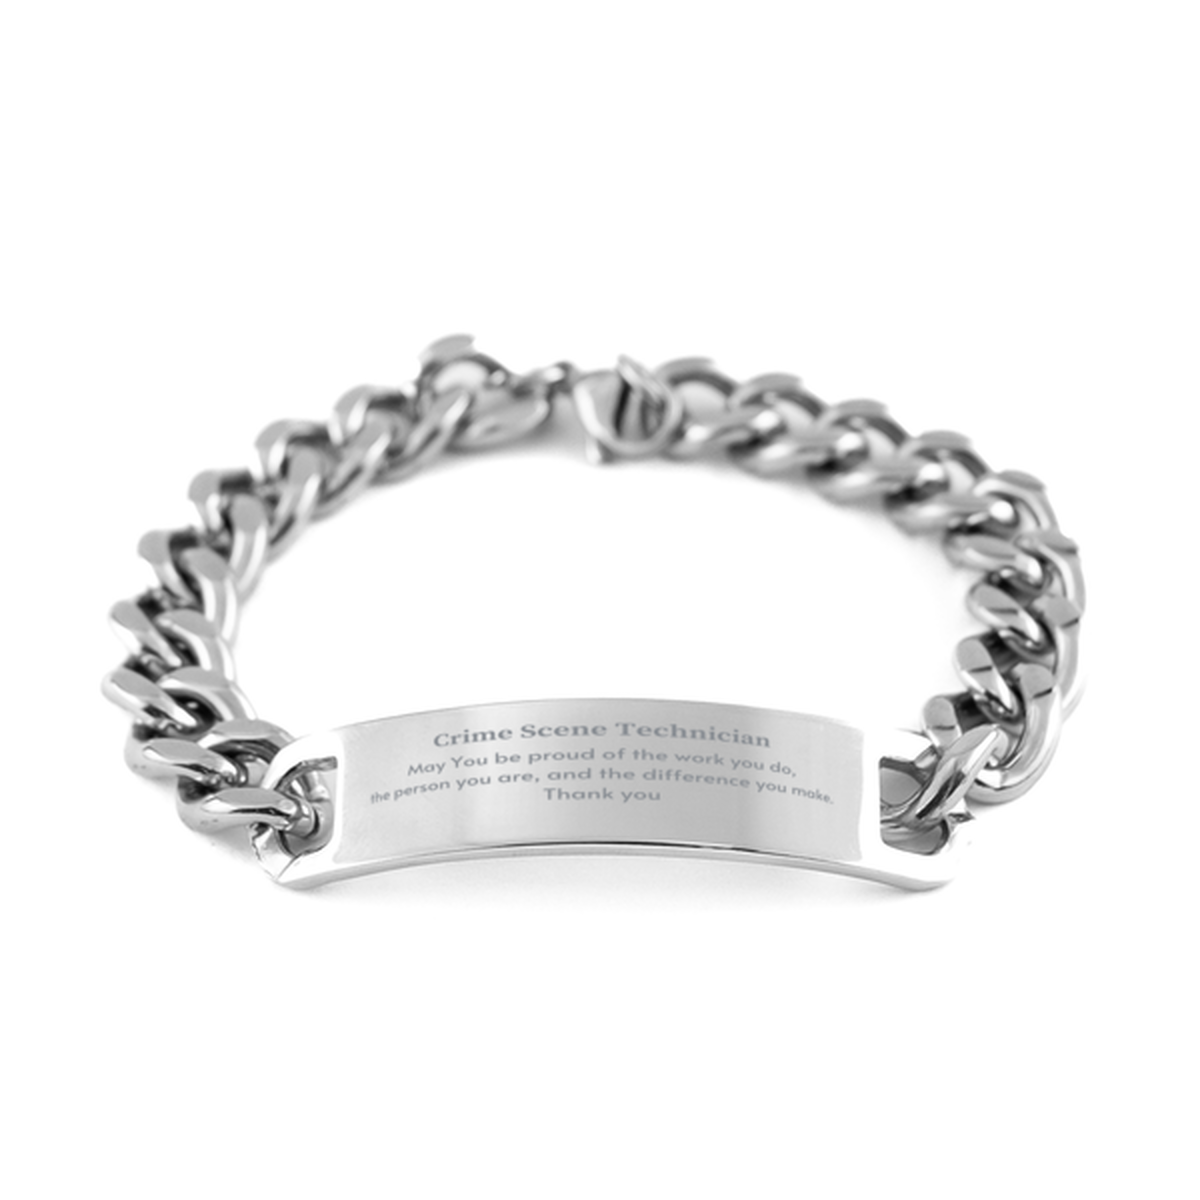 Heartwarming Cuban Chain Stainless Steel Bracelet Retirement Coworkers Gifts for Crime Scene Technician, Crime Scene Technician May You be proud of the work you do, the person you are Gifts for Boss Men Women Friends